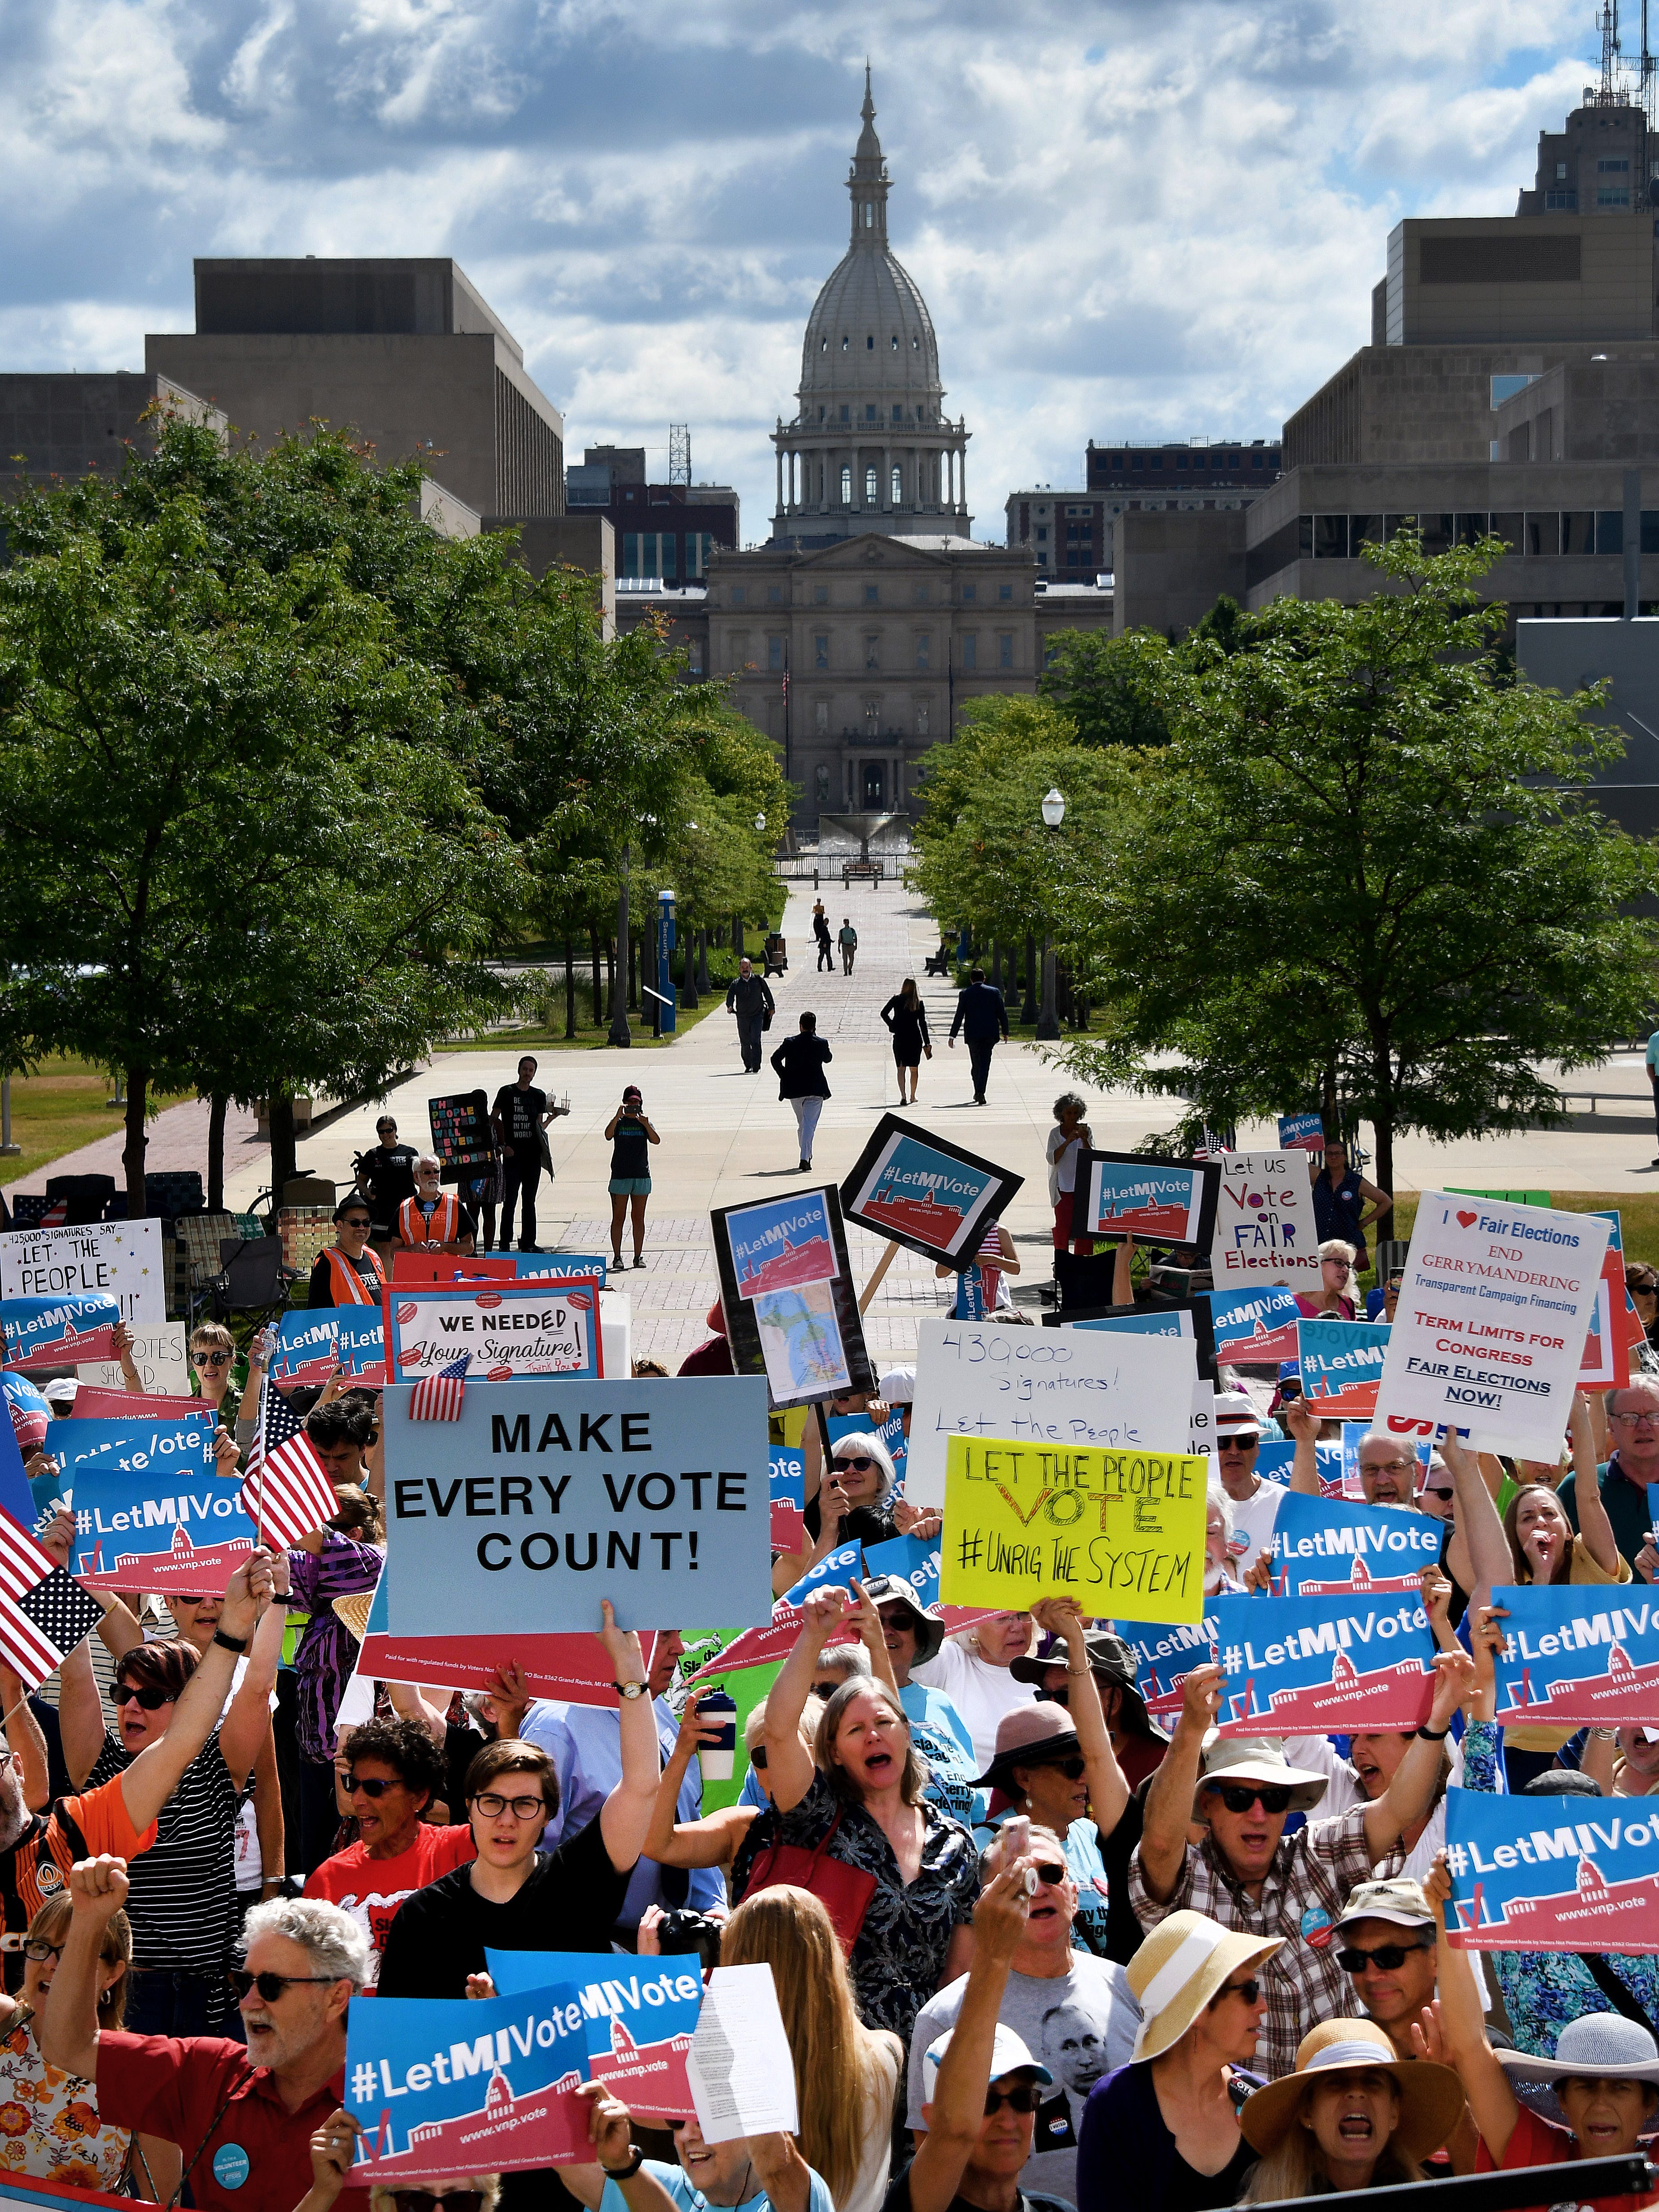 Over 100 demonstrators rally outside the Michigan Hall of Justice Wednesday, July 18, 2018, where the Michigan Supreme Court heard arguments on whether the constitution should be amended by voters to change the way political districts are made. The Capitol is visible in the background.